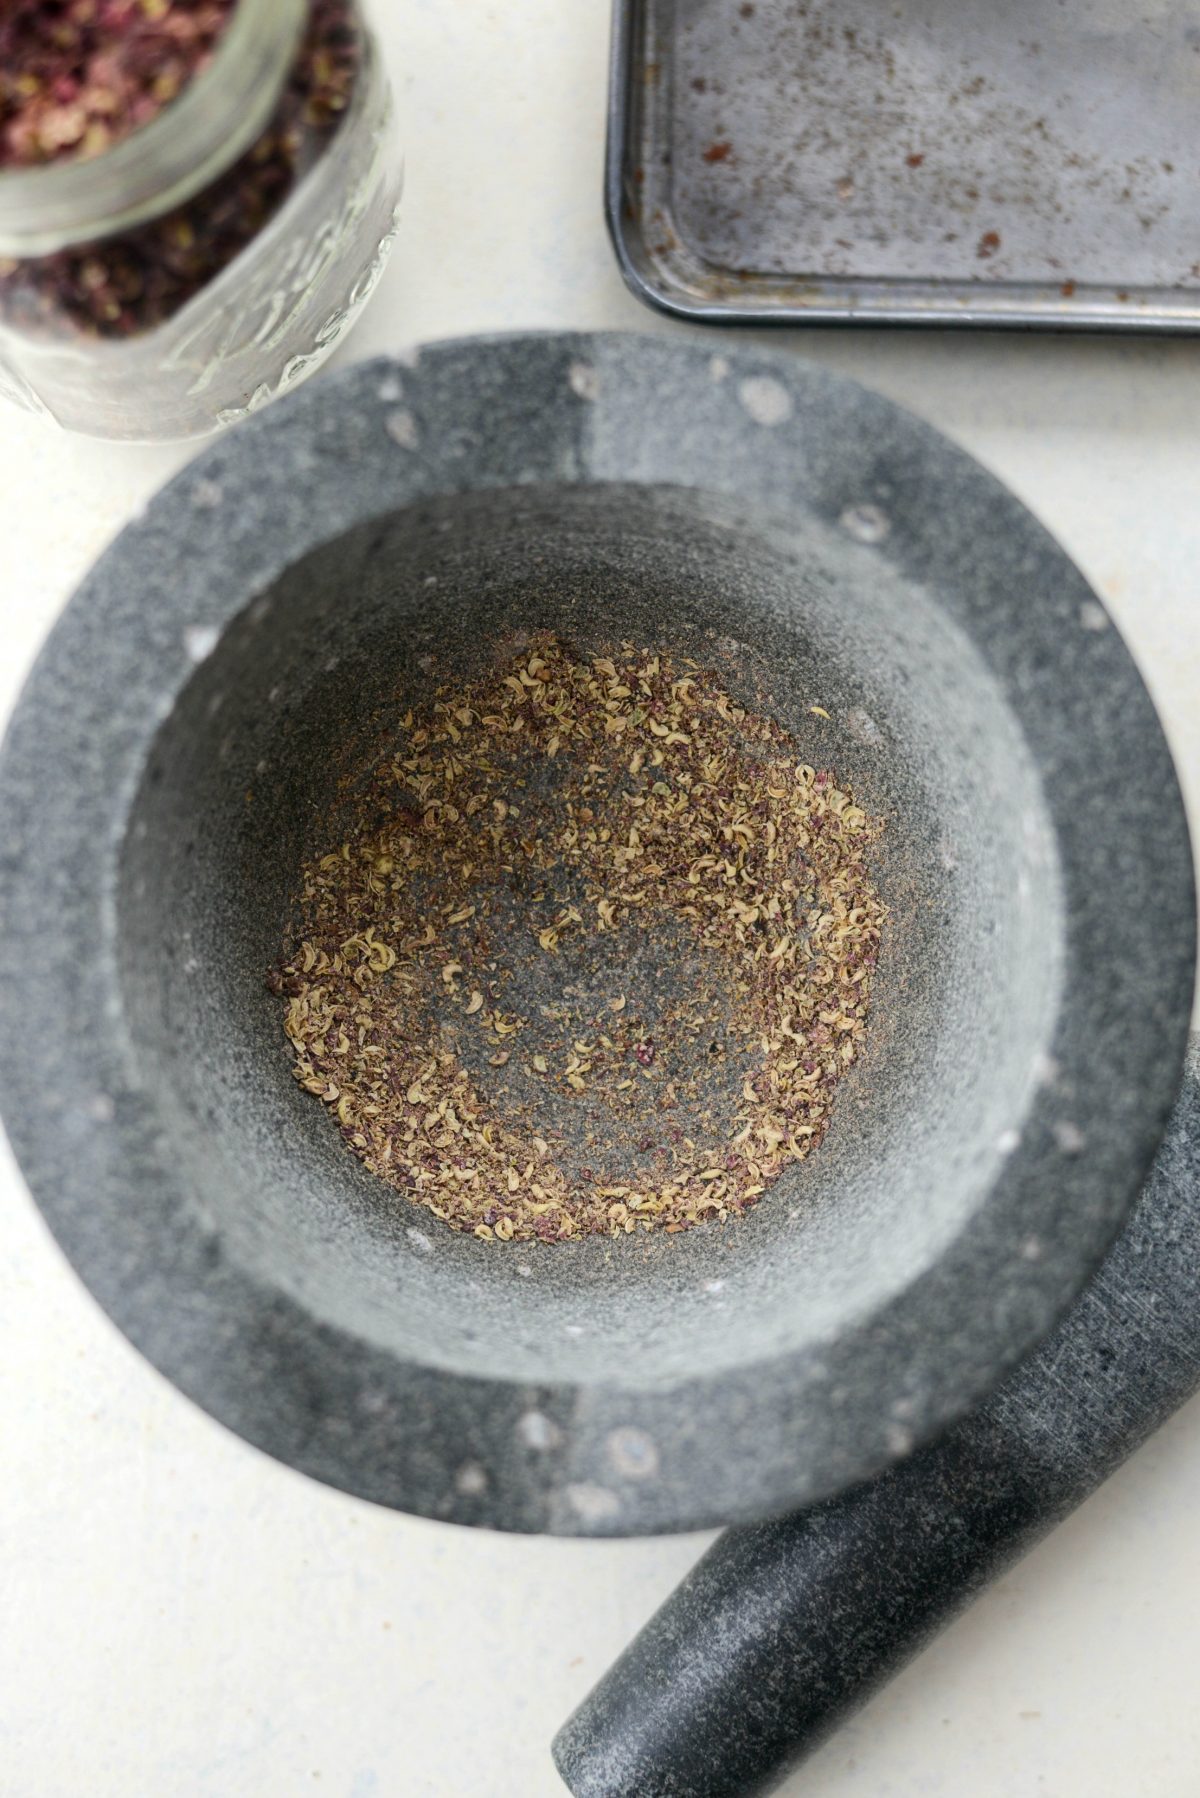 grind toasted hulls of Szechuan Peppercorns with pestle